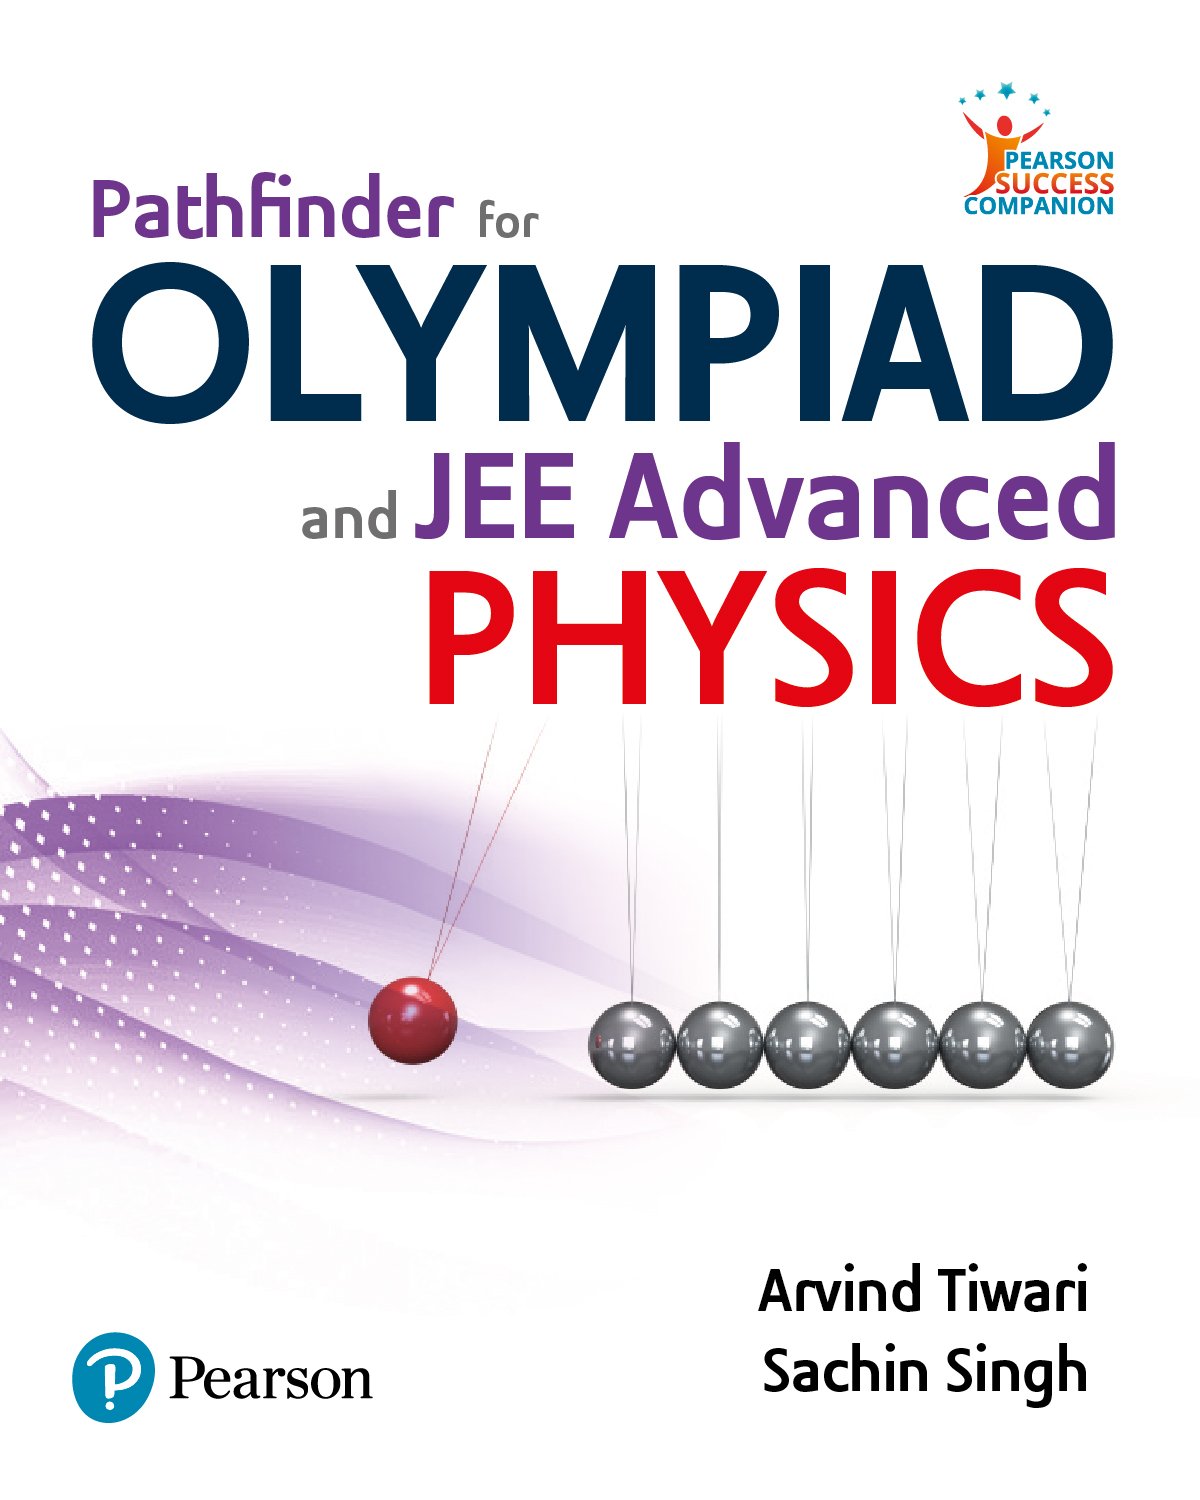 How is Pathfinder for Olympiad and JEE Physics by Pearson ...